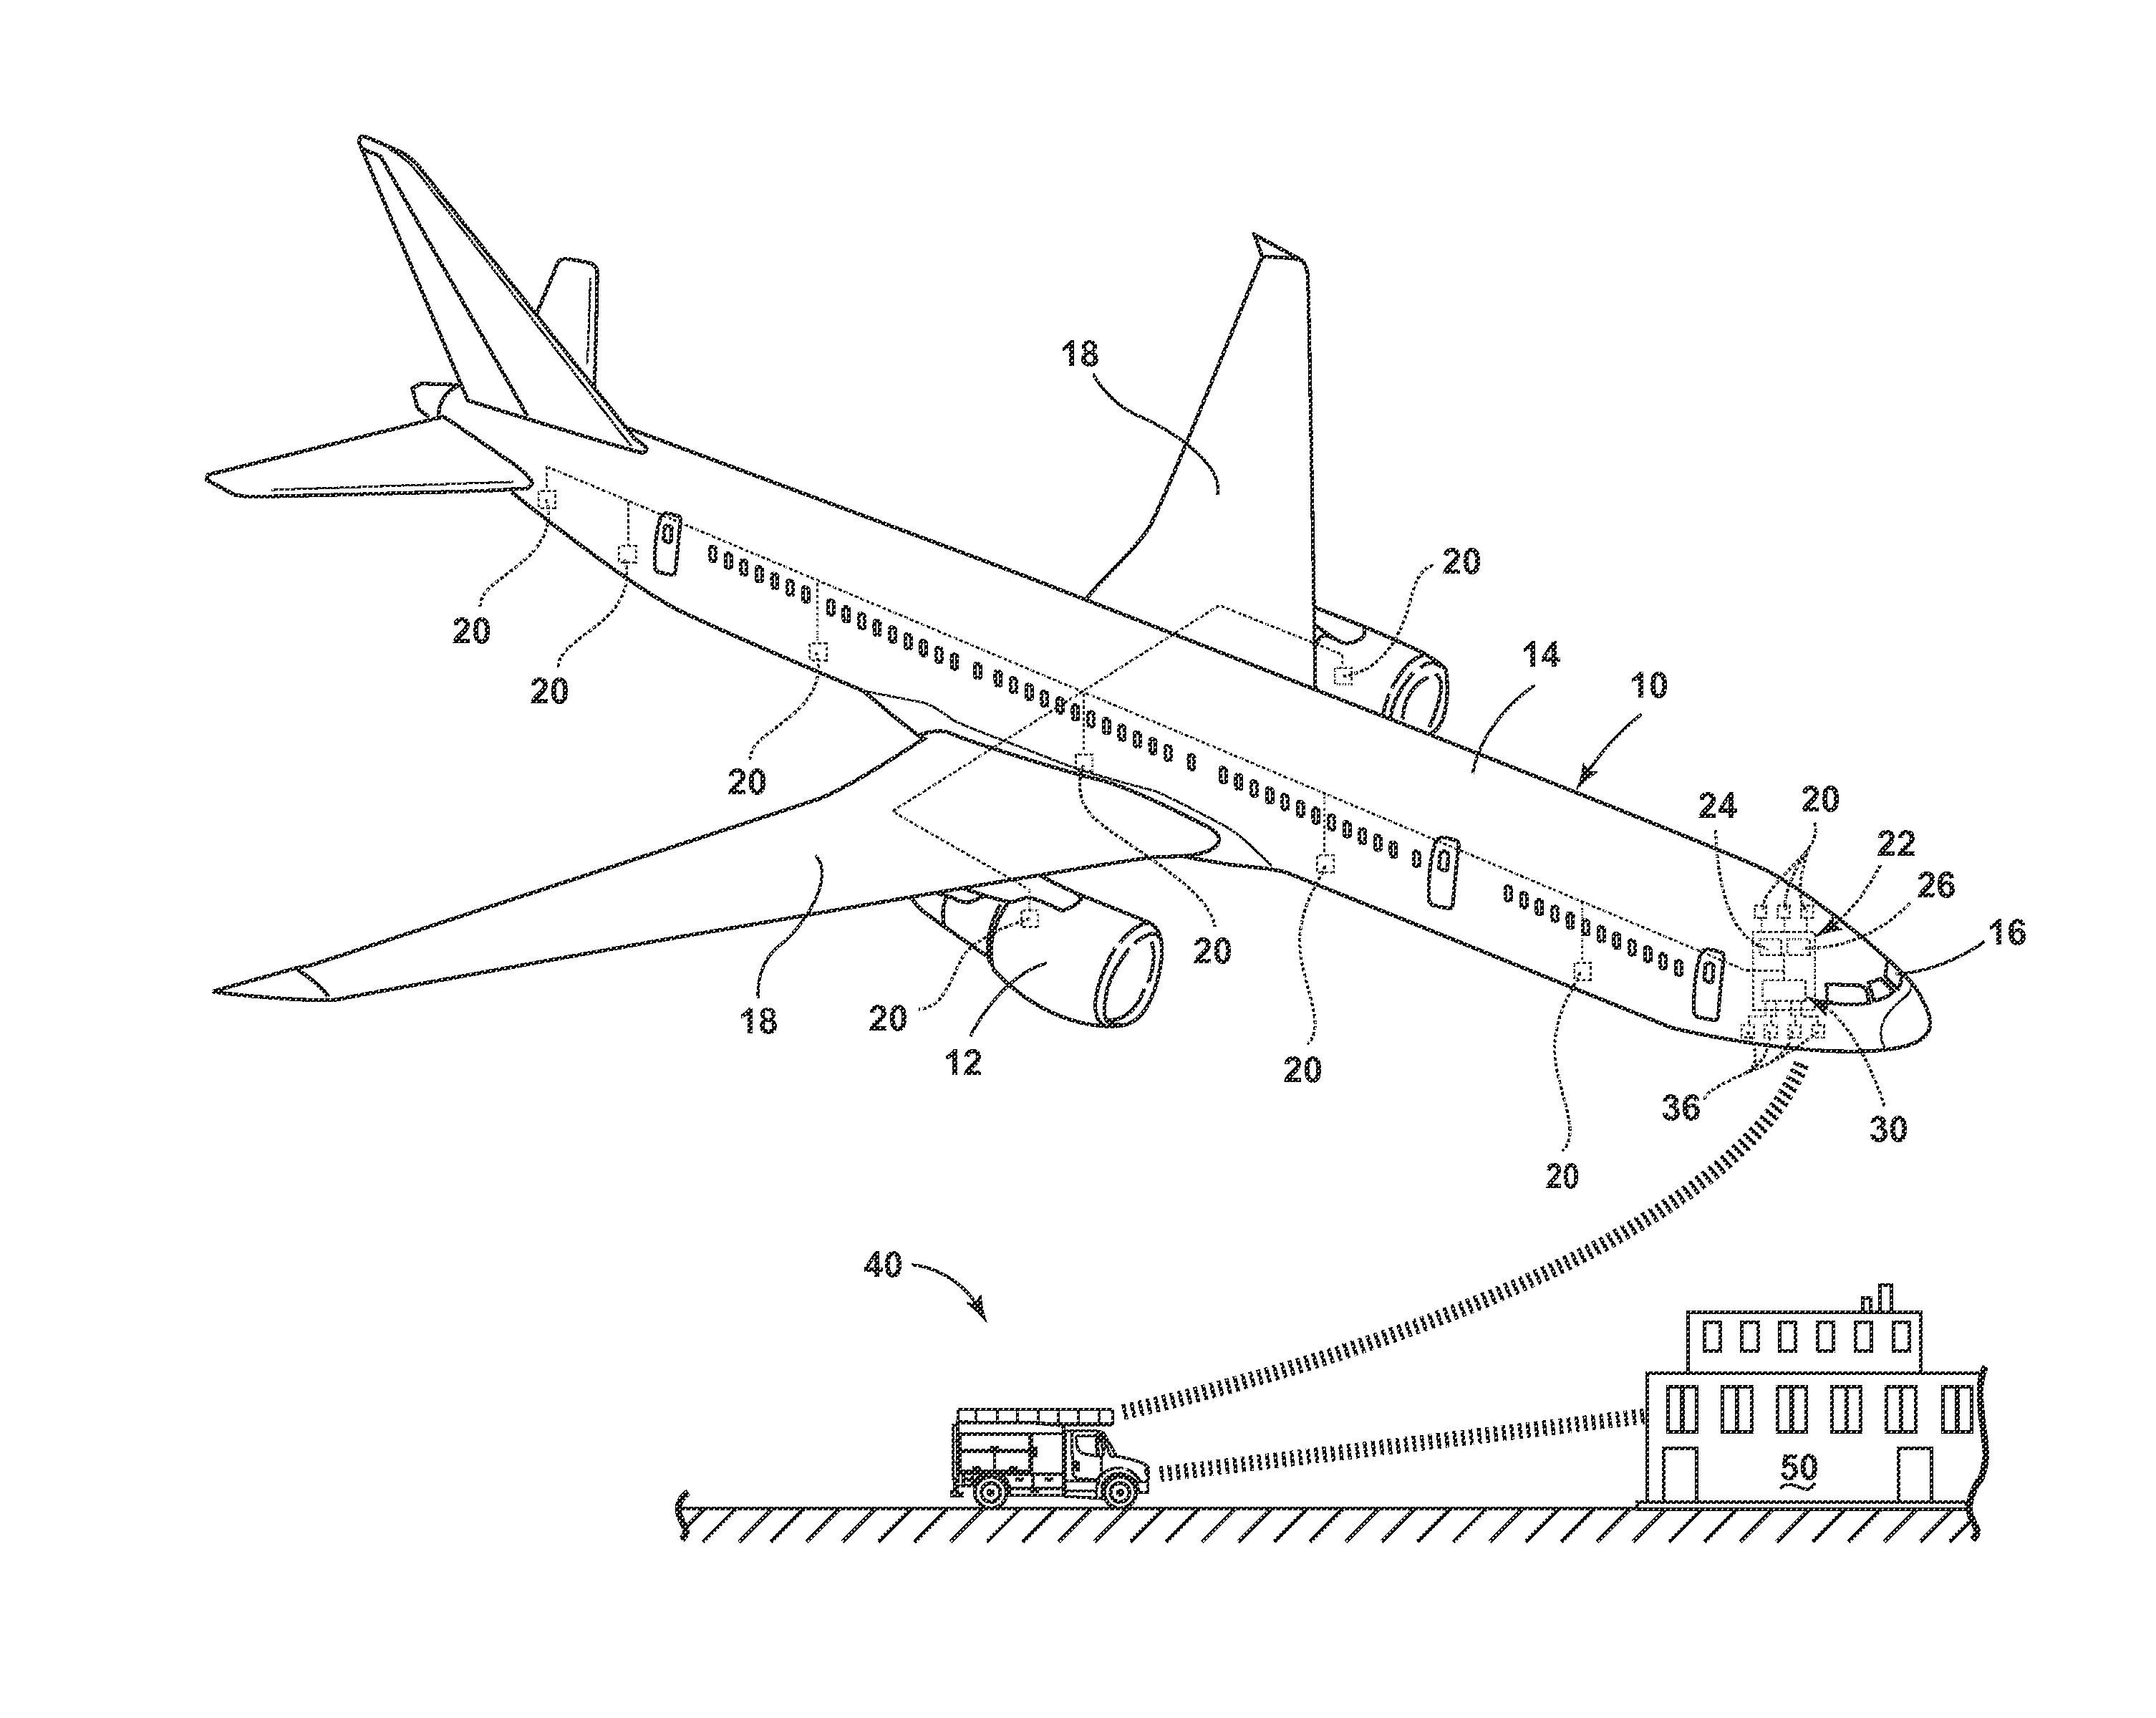 Method of identifying faults in an aircraft